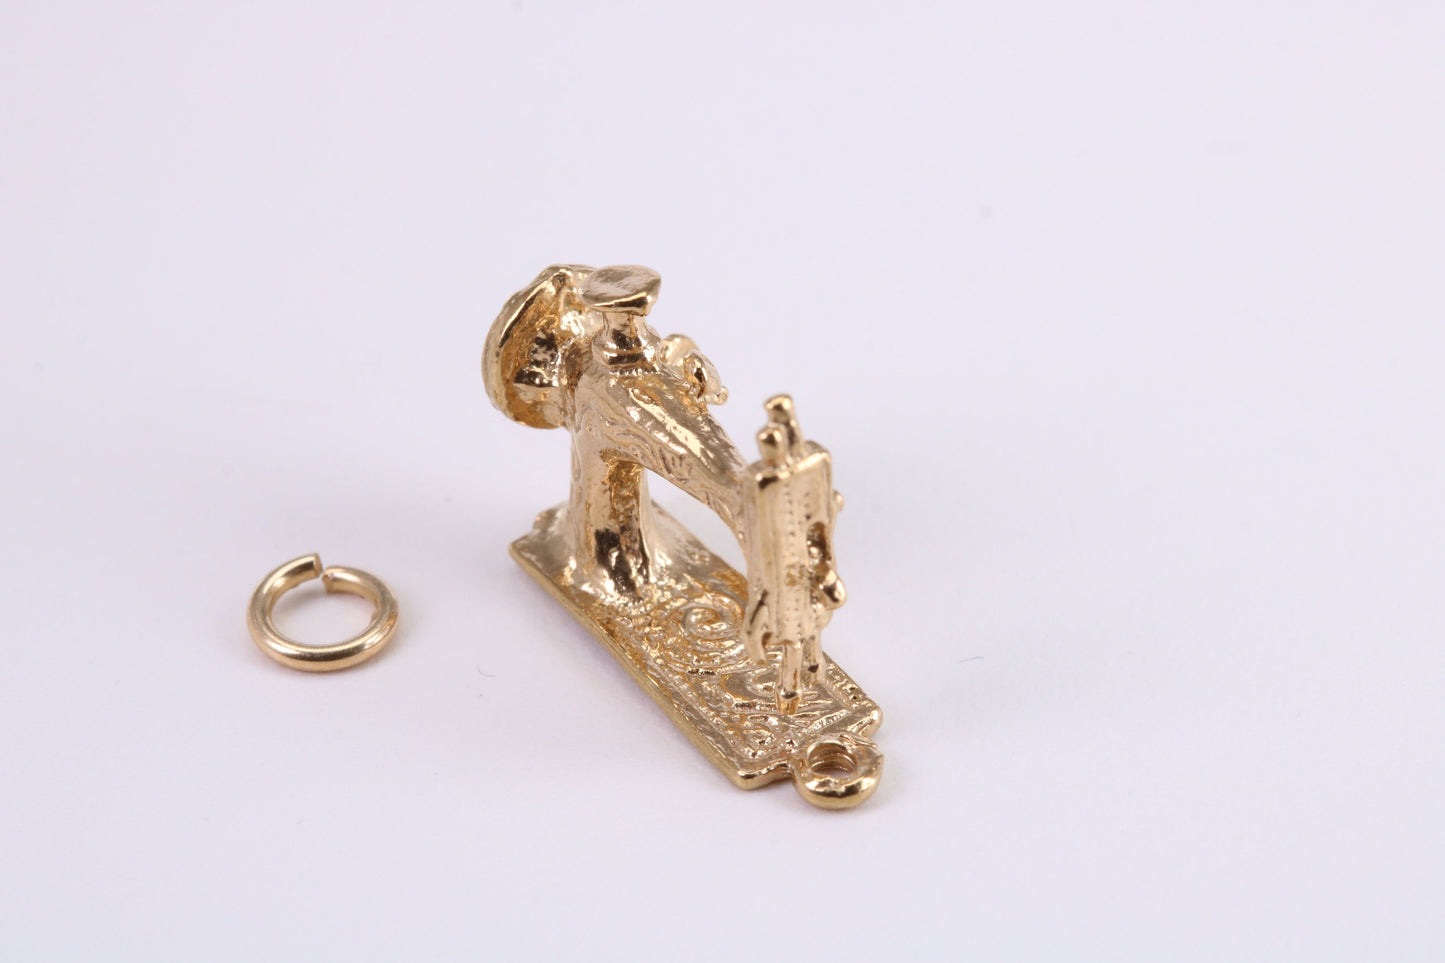 Sewing Machine Charm, Traditional Charm, Made from Solid Yellow Gold, British Hallmarked, Complete with Attachment Link